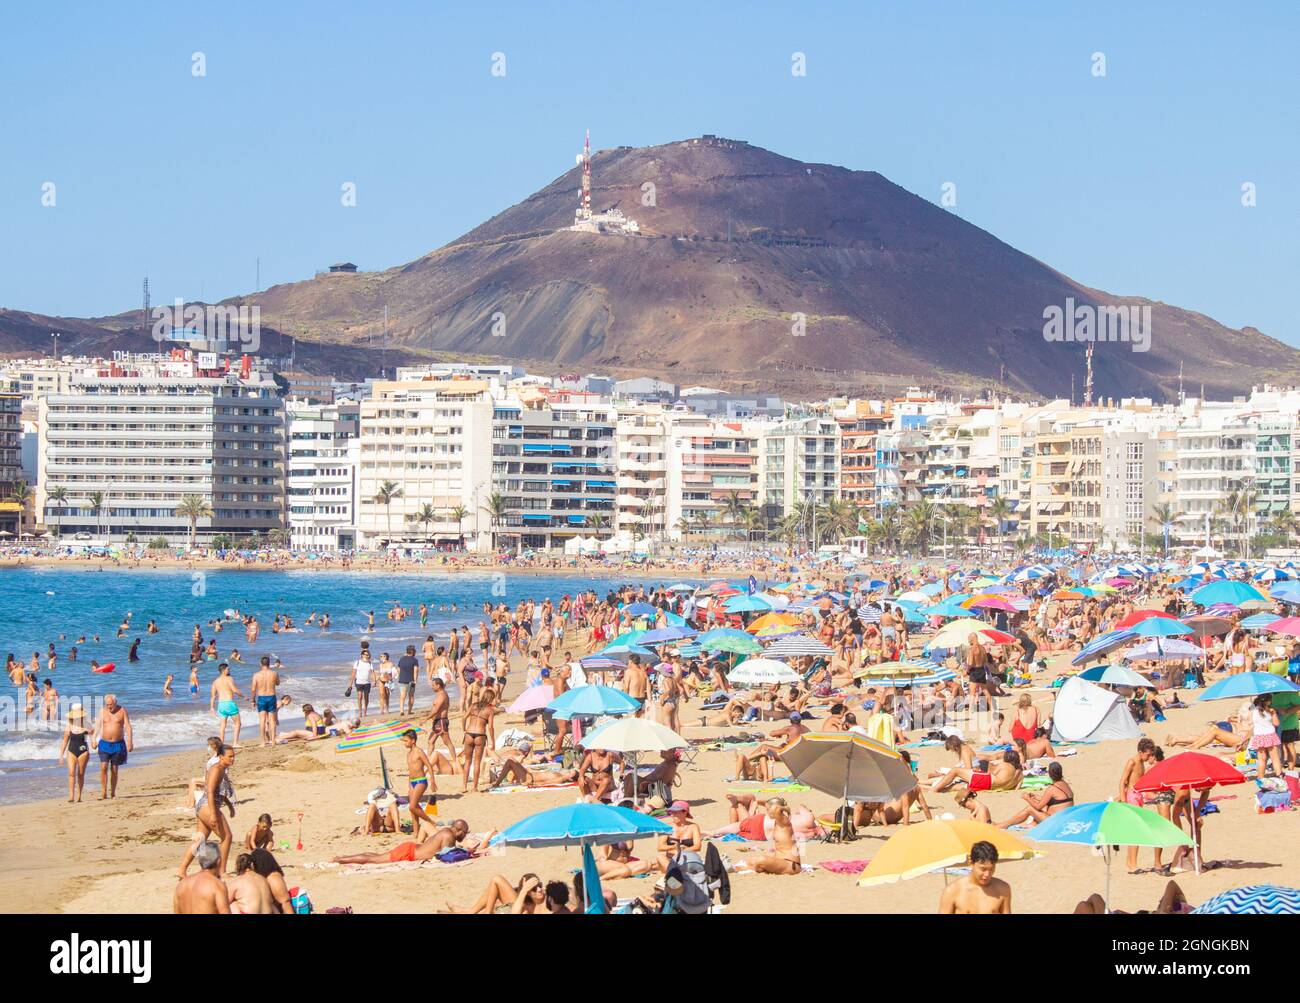 Gran Canaria, Canary Islands, Spain. 25th September, 2021. Tourists, many  from the UK, bask in glorious sunshine on the city beach in Las Palmas on  Gran Canaria as a volcano continues to